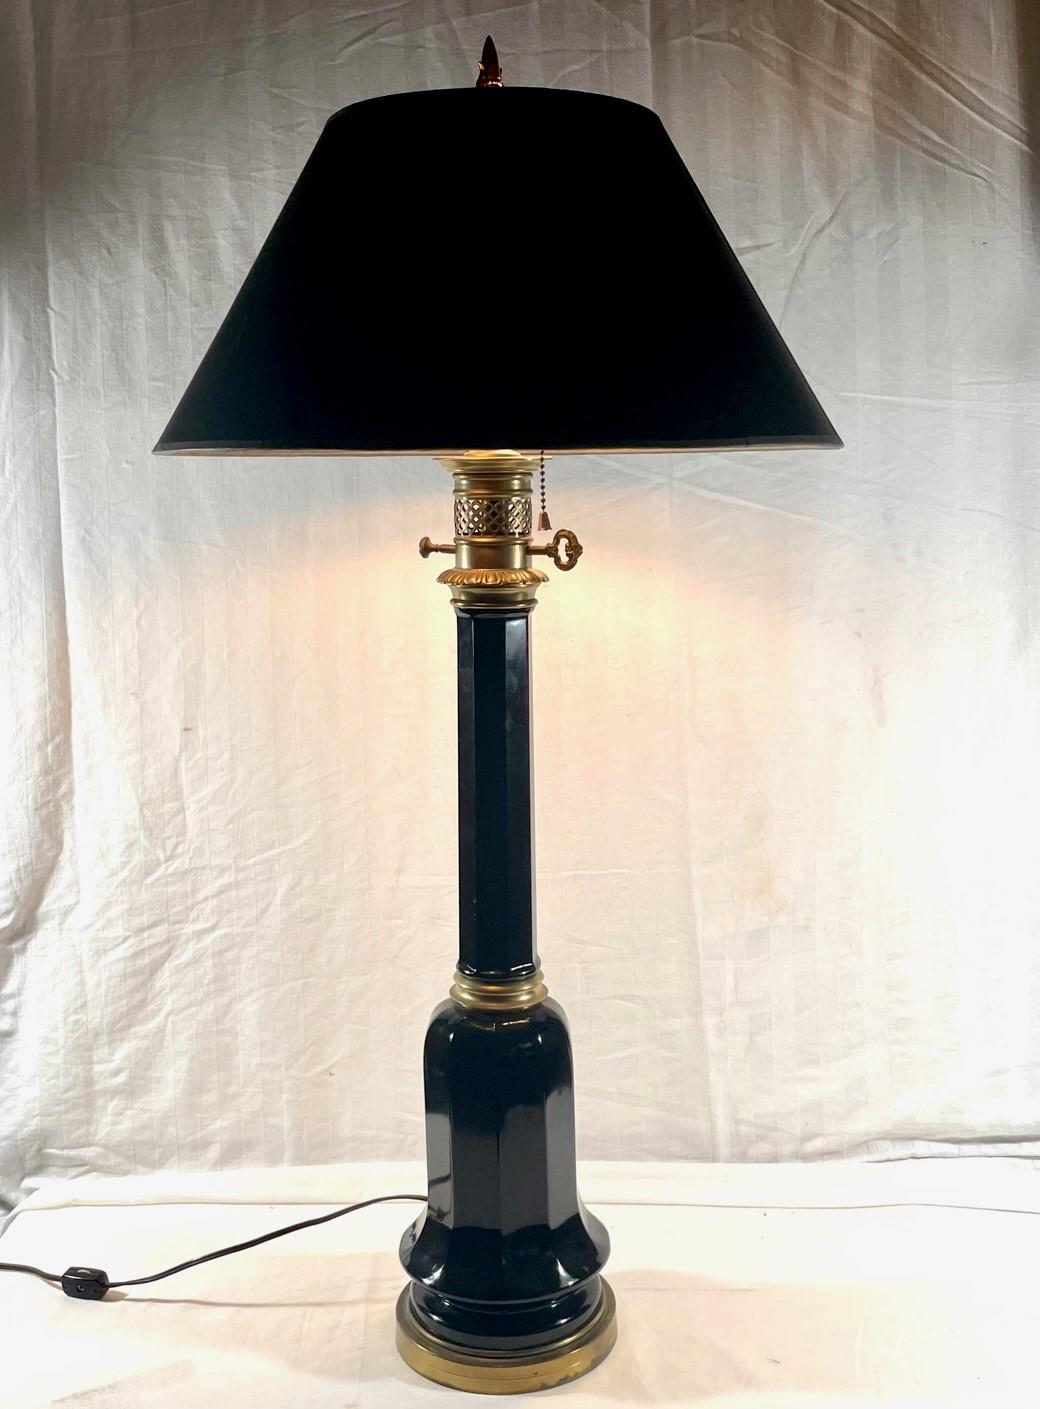 19th Century tall black glass table lamp.

Victorian tall black glass brass mounted table lamp. A decorative and timeless design, this oil lamp is now converted to electricity. The stylish lamp is fitted with a custom black paper shade.
Condition